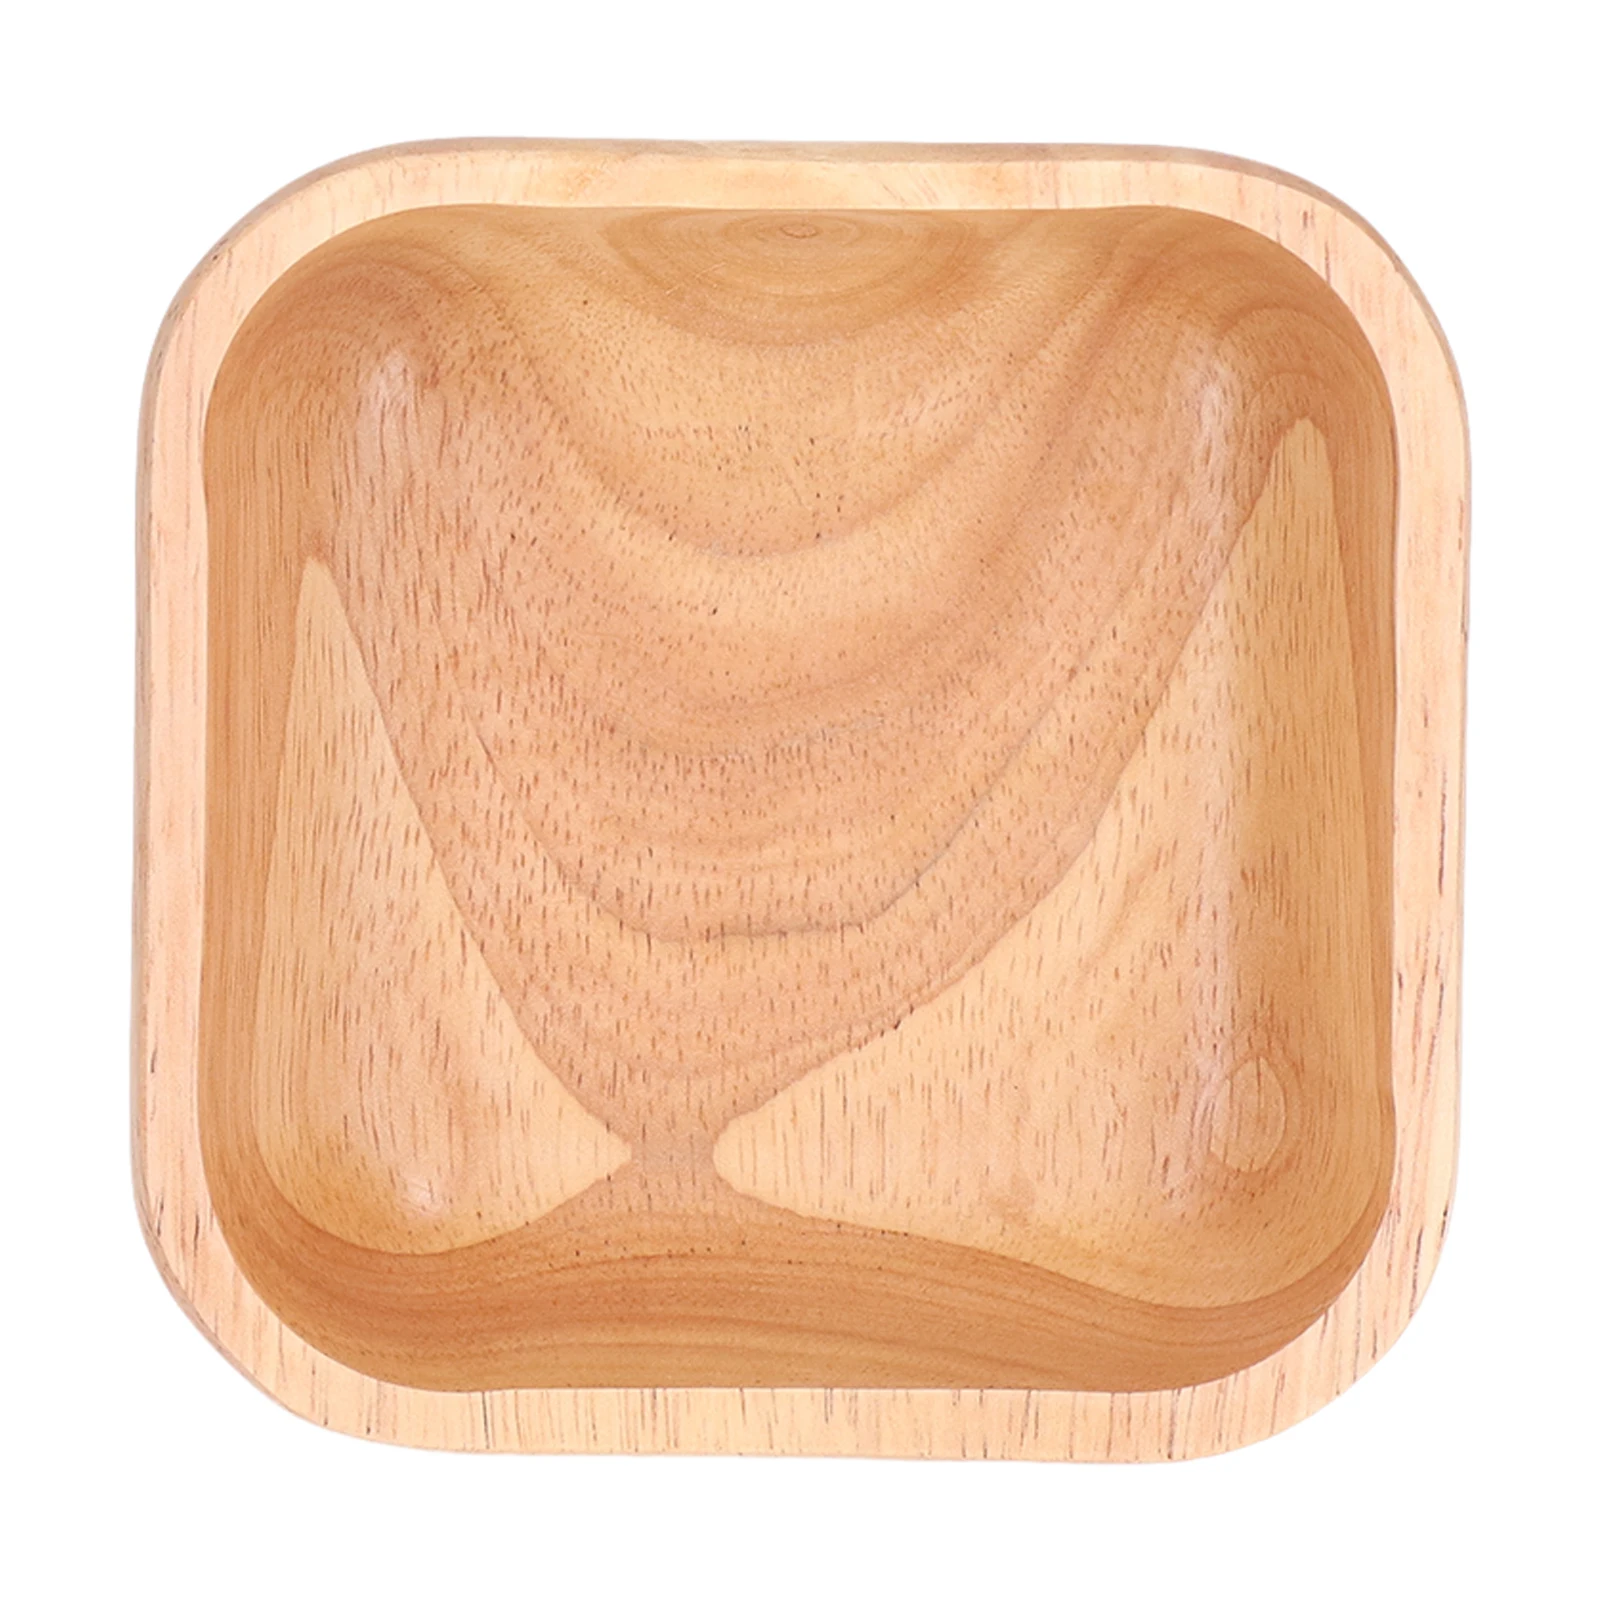 

Rubber Wood Salad Bowl Handcrafted Simple Stylish Square Bowl Tableware for Party Family Gathering15cm / 5.9in